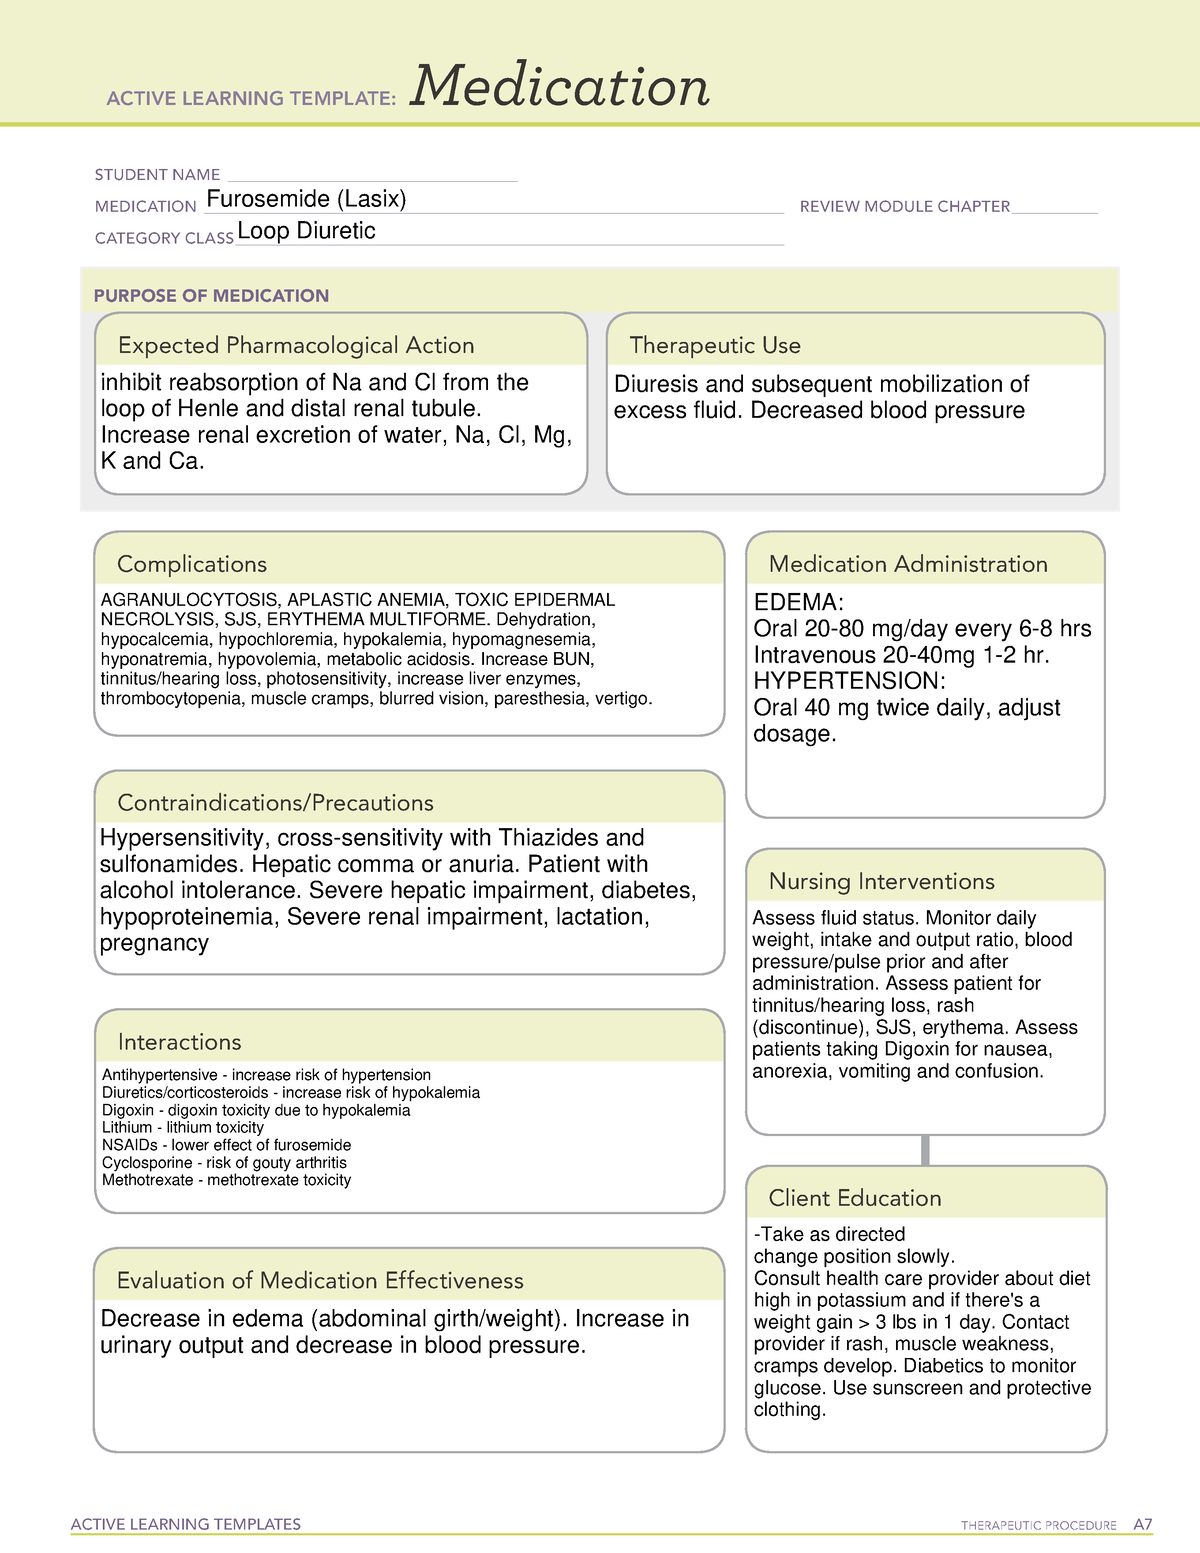 furosemide-medication-template-active-learning-templates-therapeutic